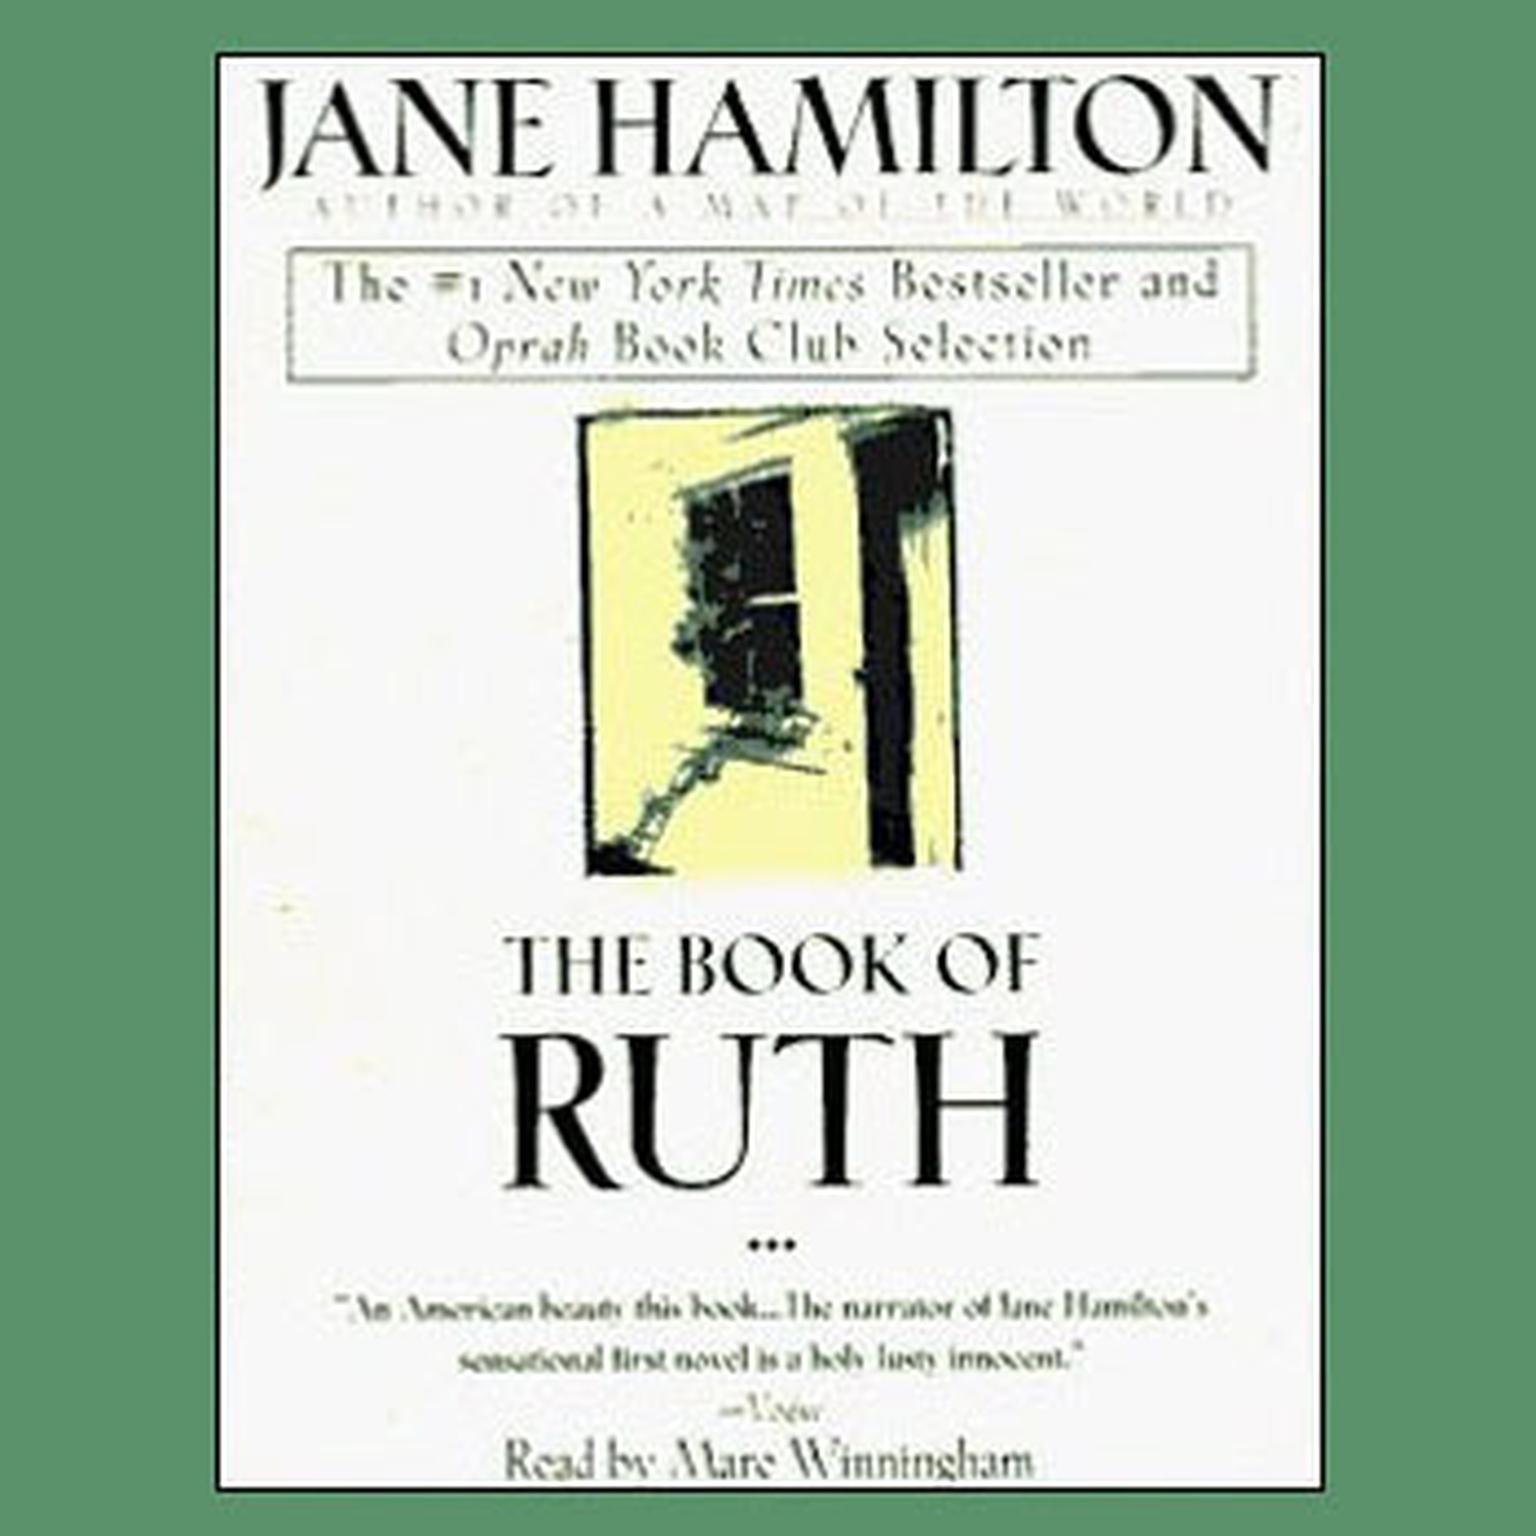 The Book of Ruth (Abridged) Audiobook, by Jane Hamilton